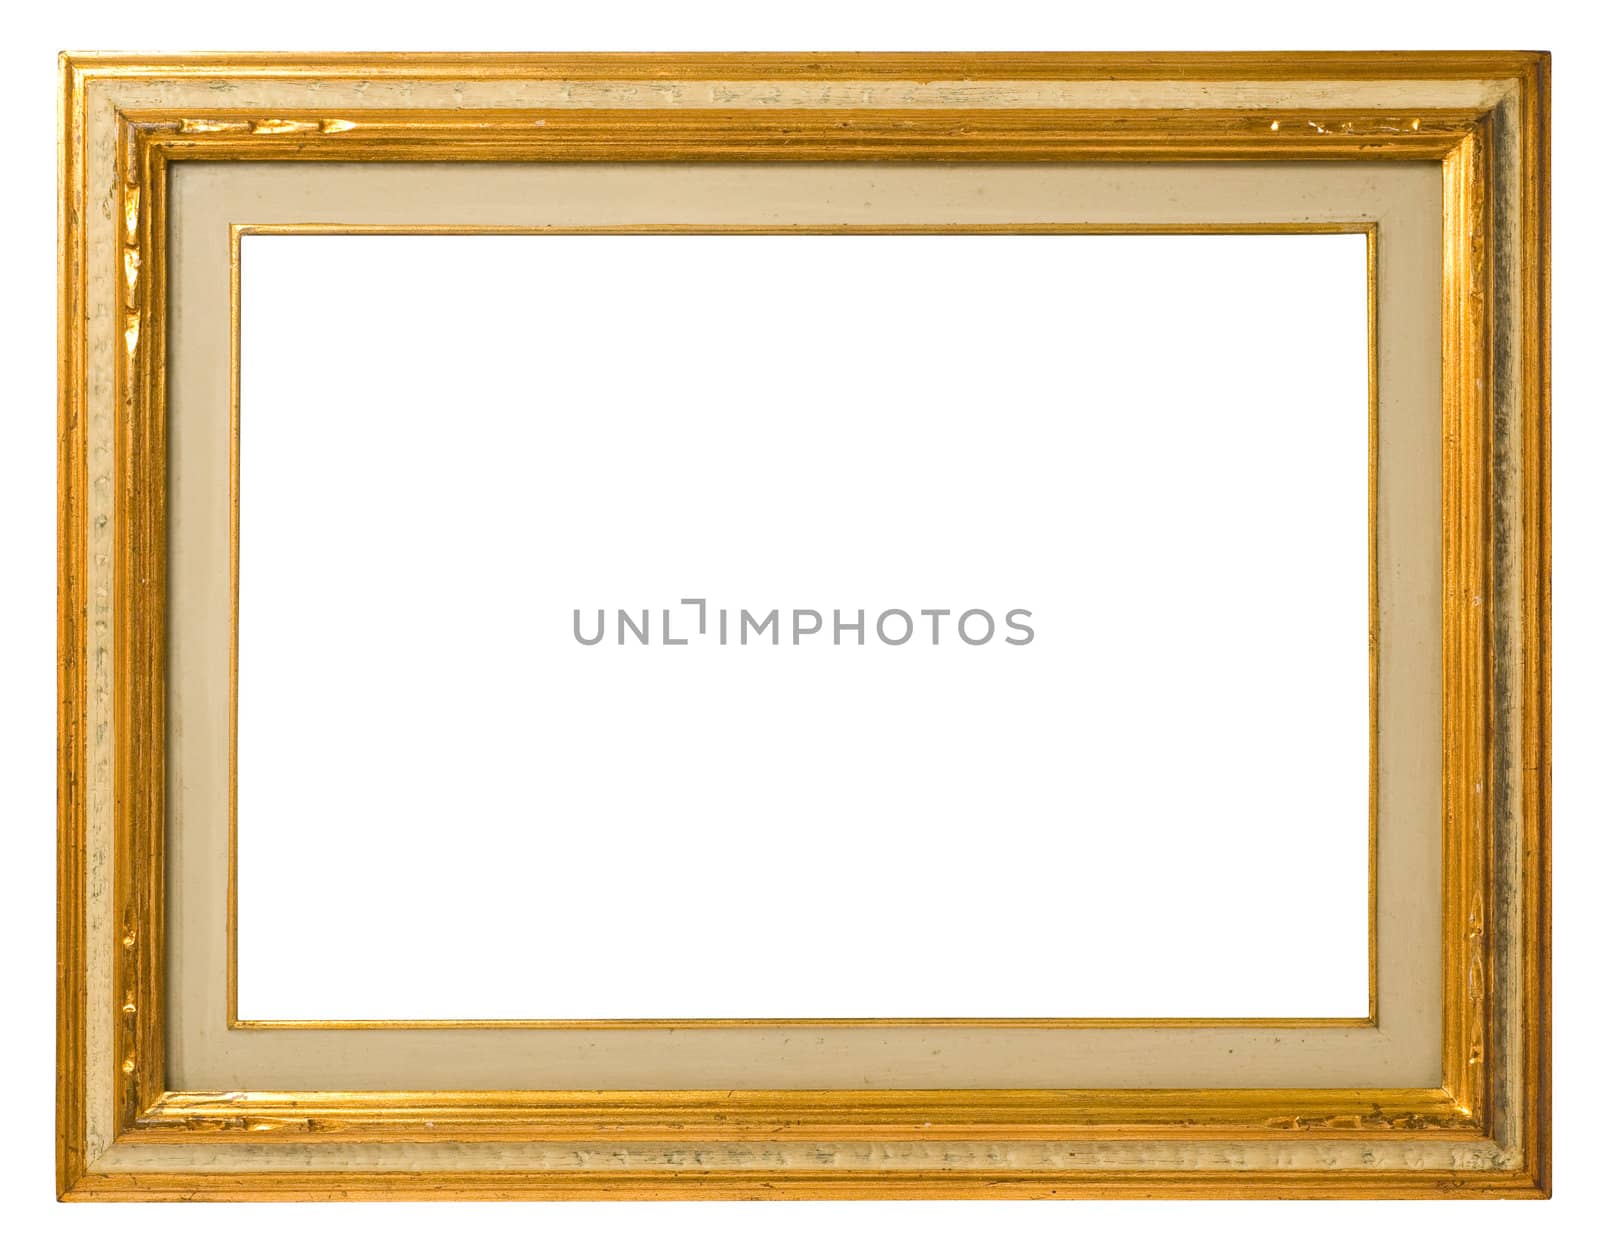 Antique gilt wood frame, italian style,  isolated on white background - include clipping path.